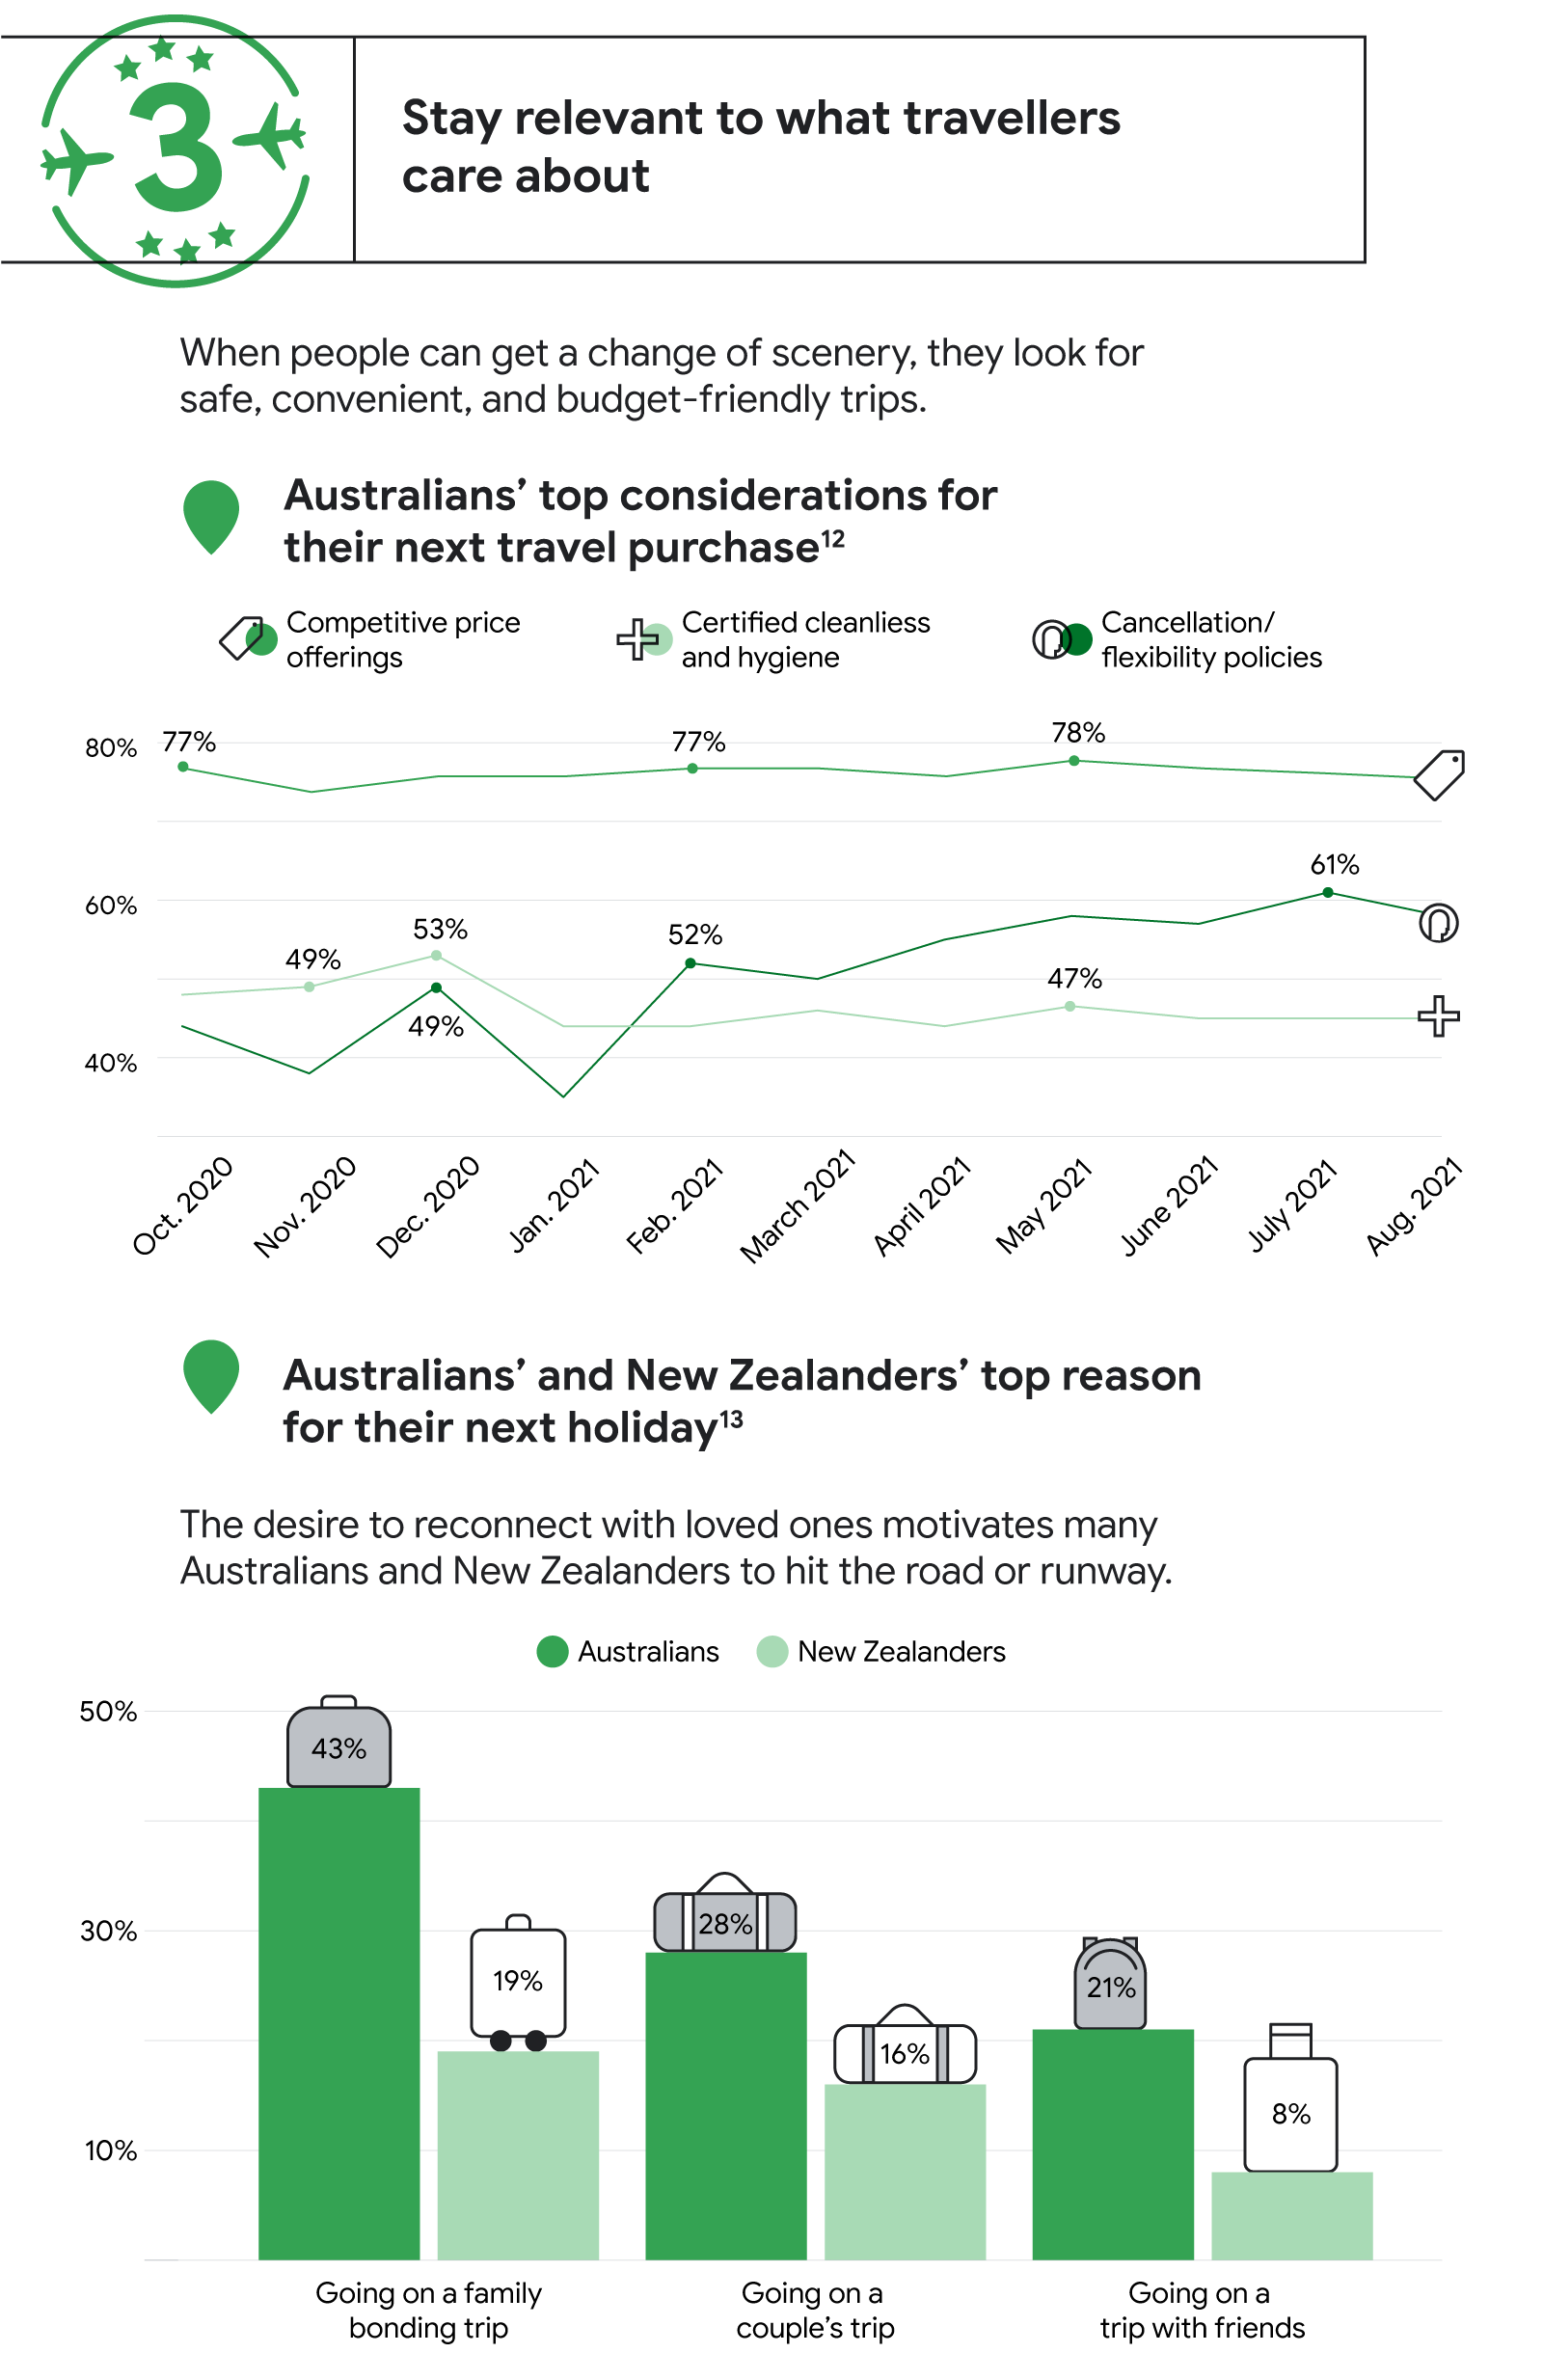 TwG_AUNZ_Travel-Insights_IG-8.png